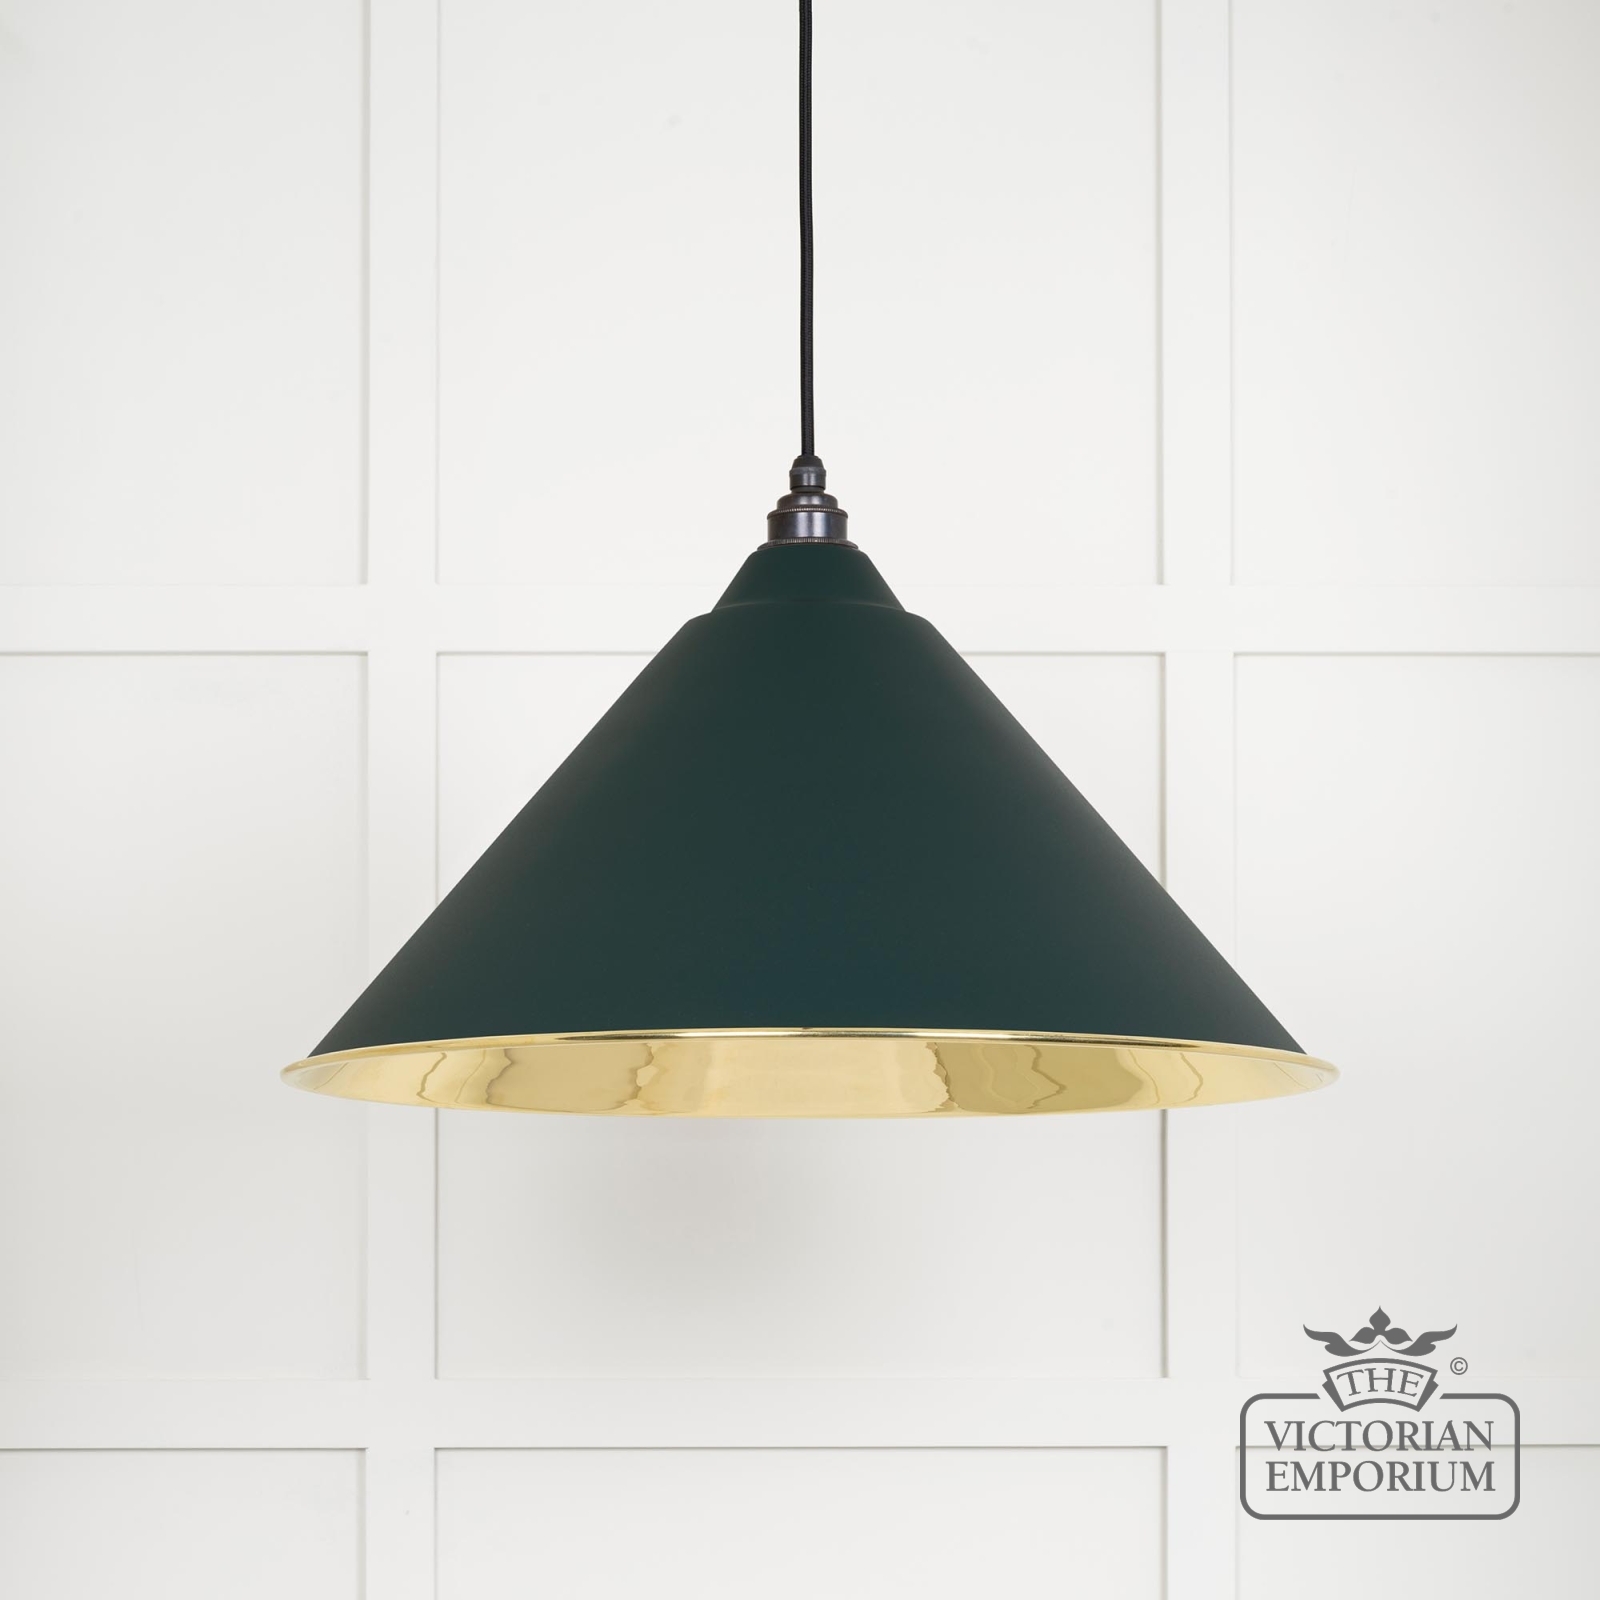 Hockliffe pendant light in Dingle and Smooth Brass